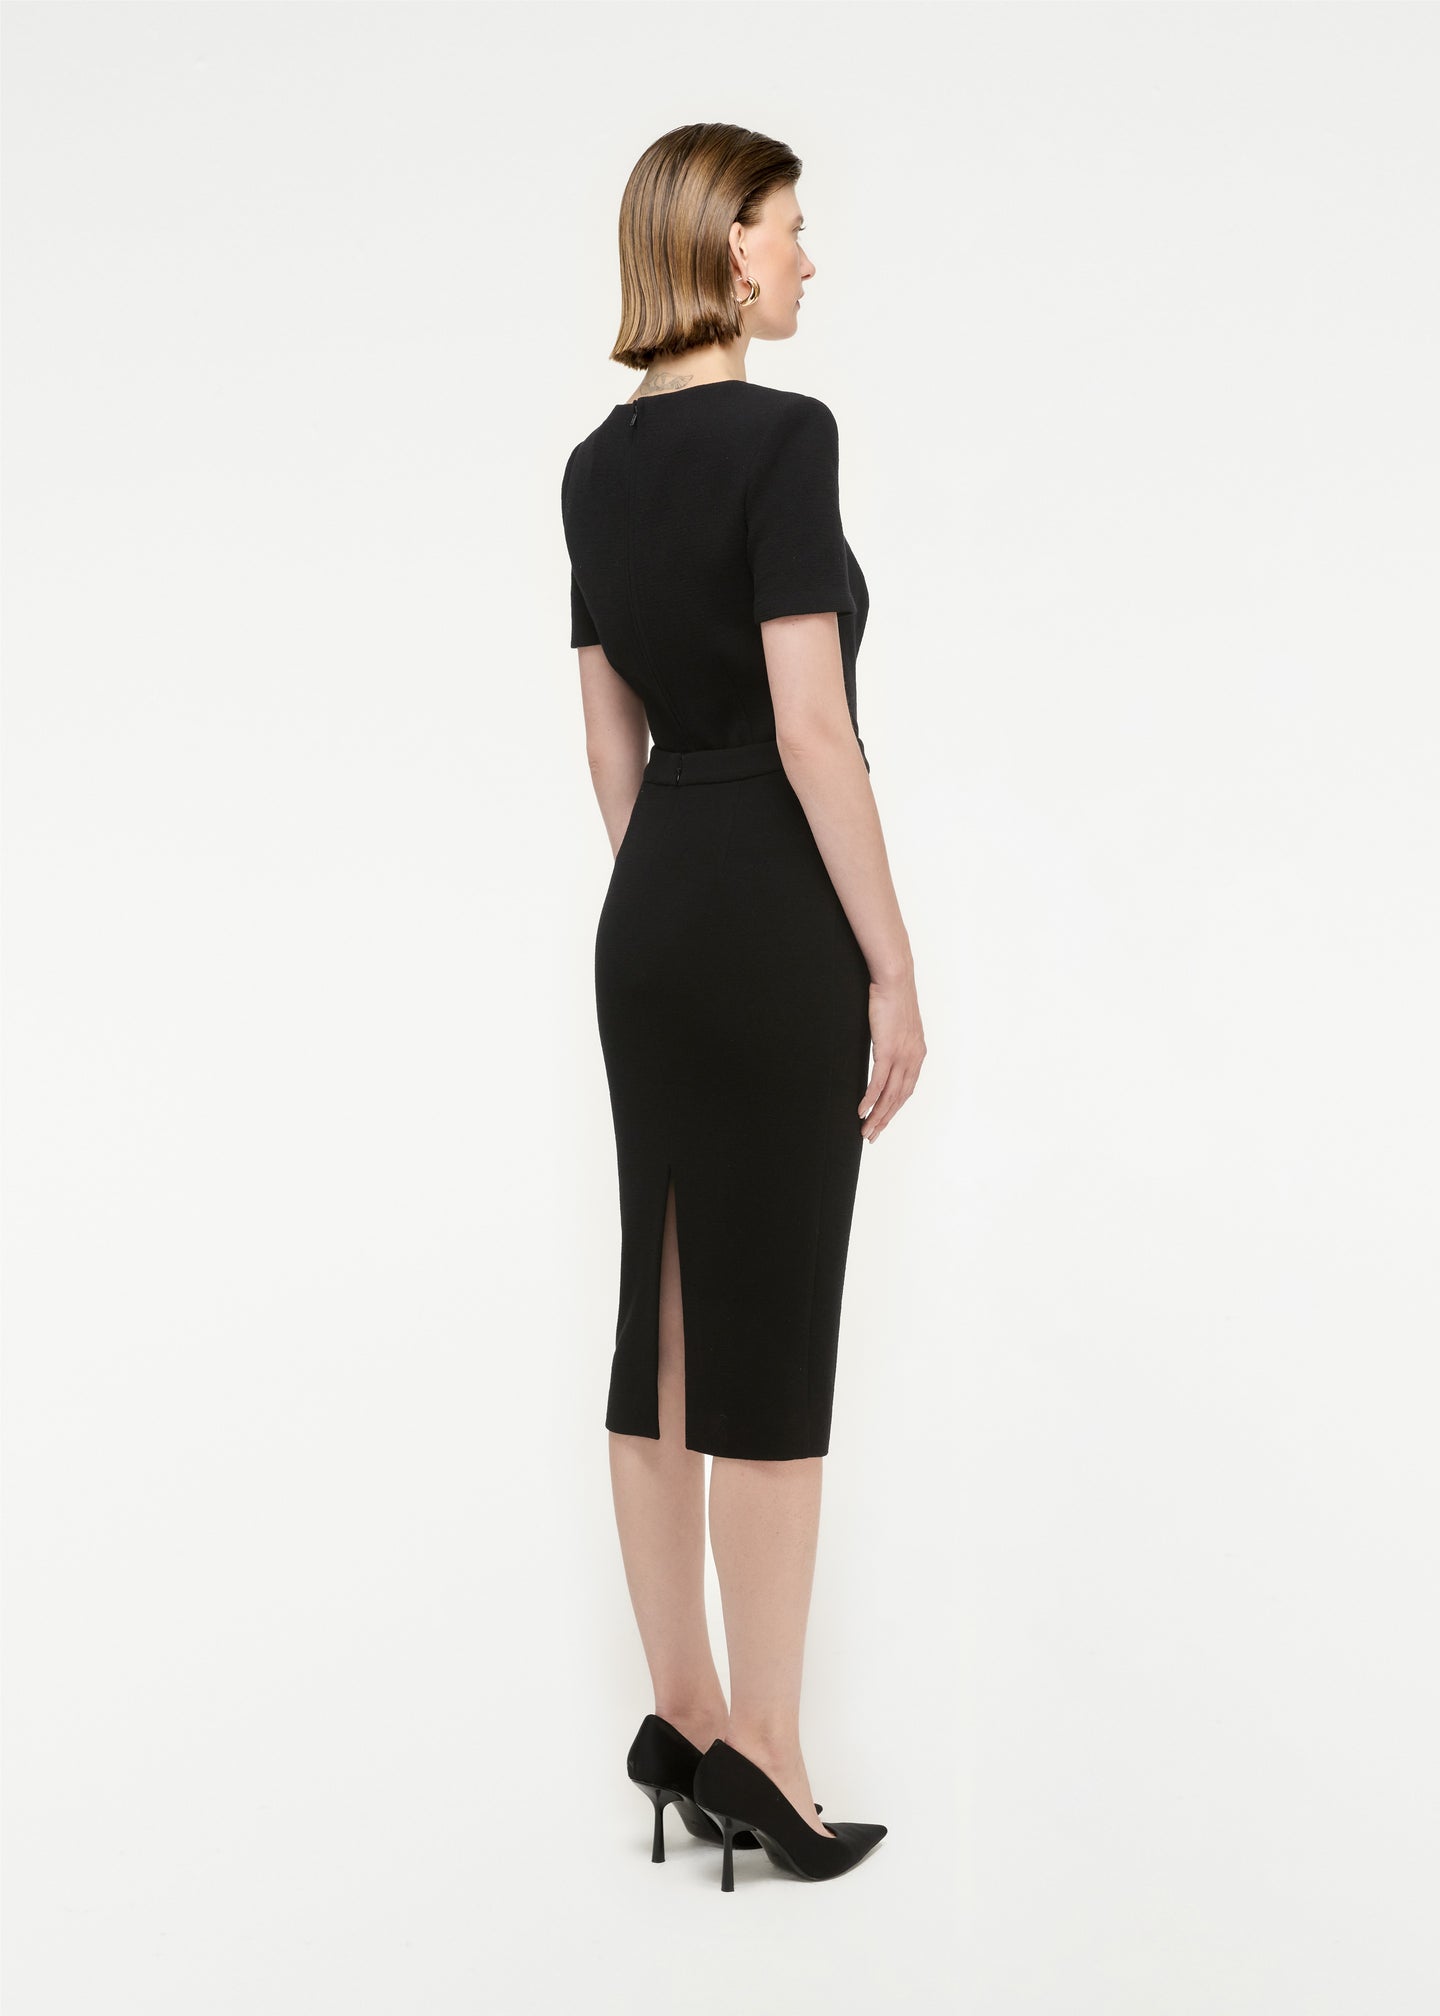 The back of a woman wearing the Wool Crepe Midi Skirt in Black